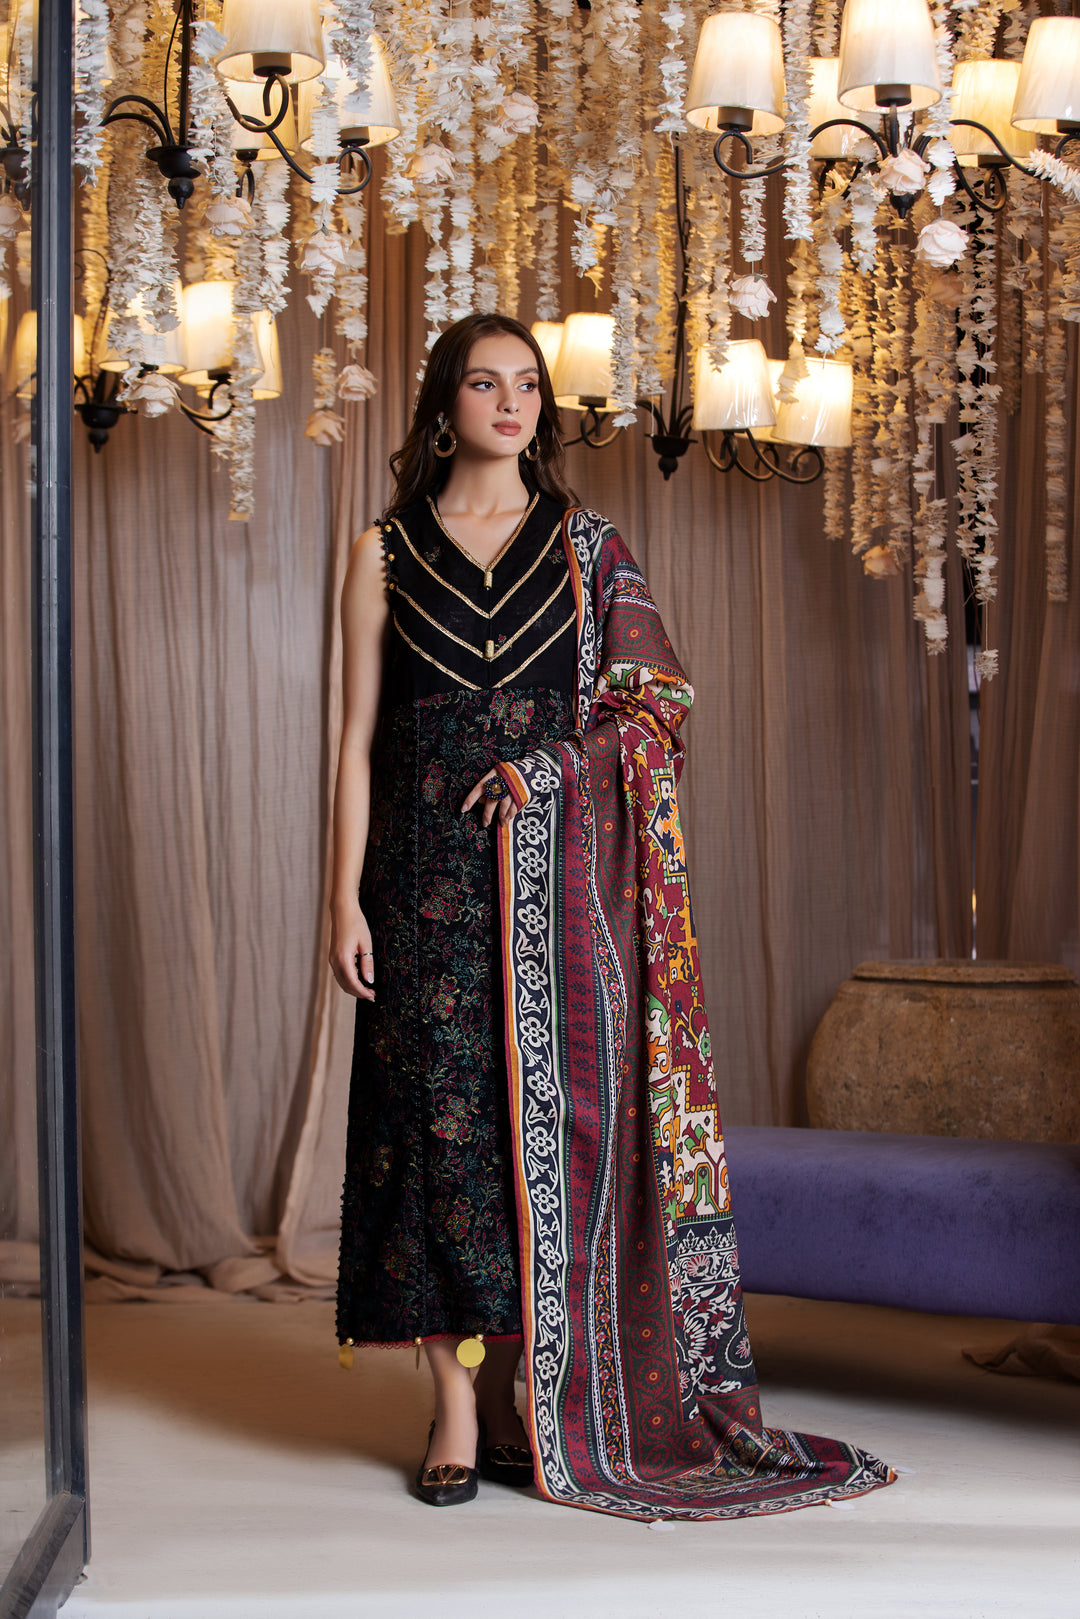 3 PIECE LUXURY UNSTITCHED-EMBROIDERED SELF JACQUARD KHADDAR SUIT